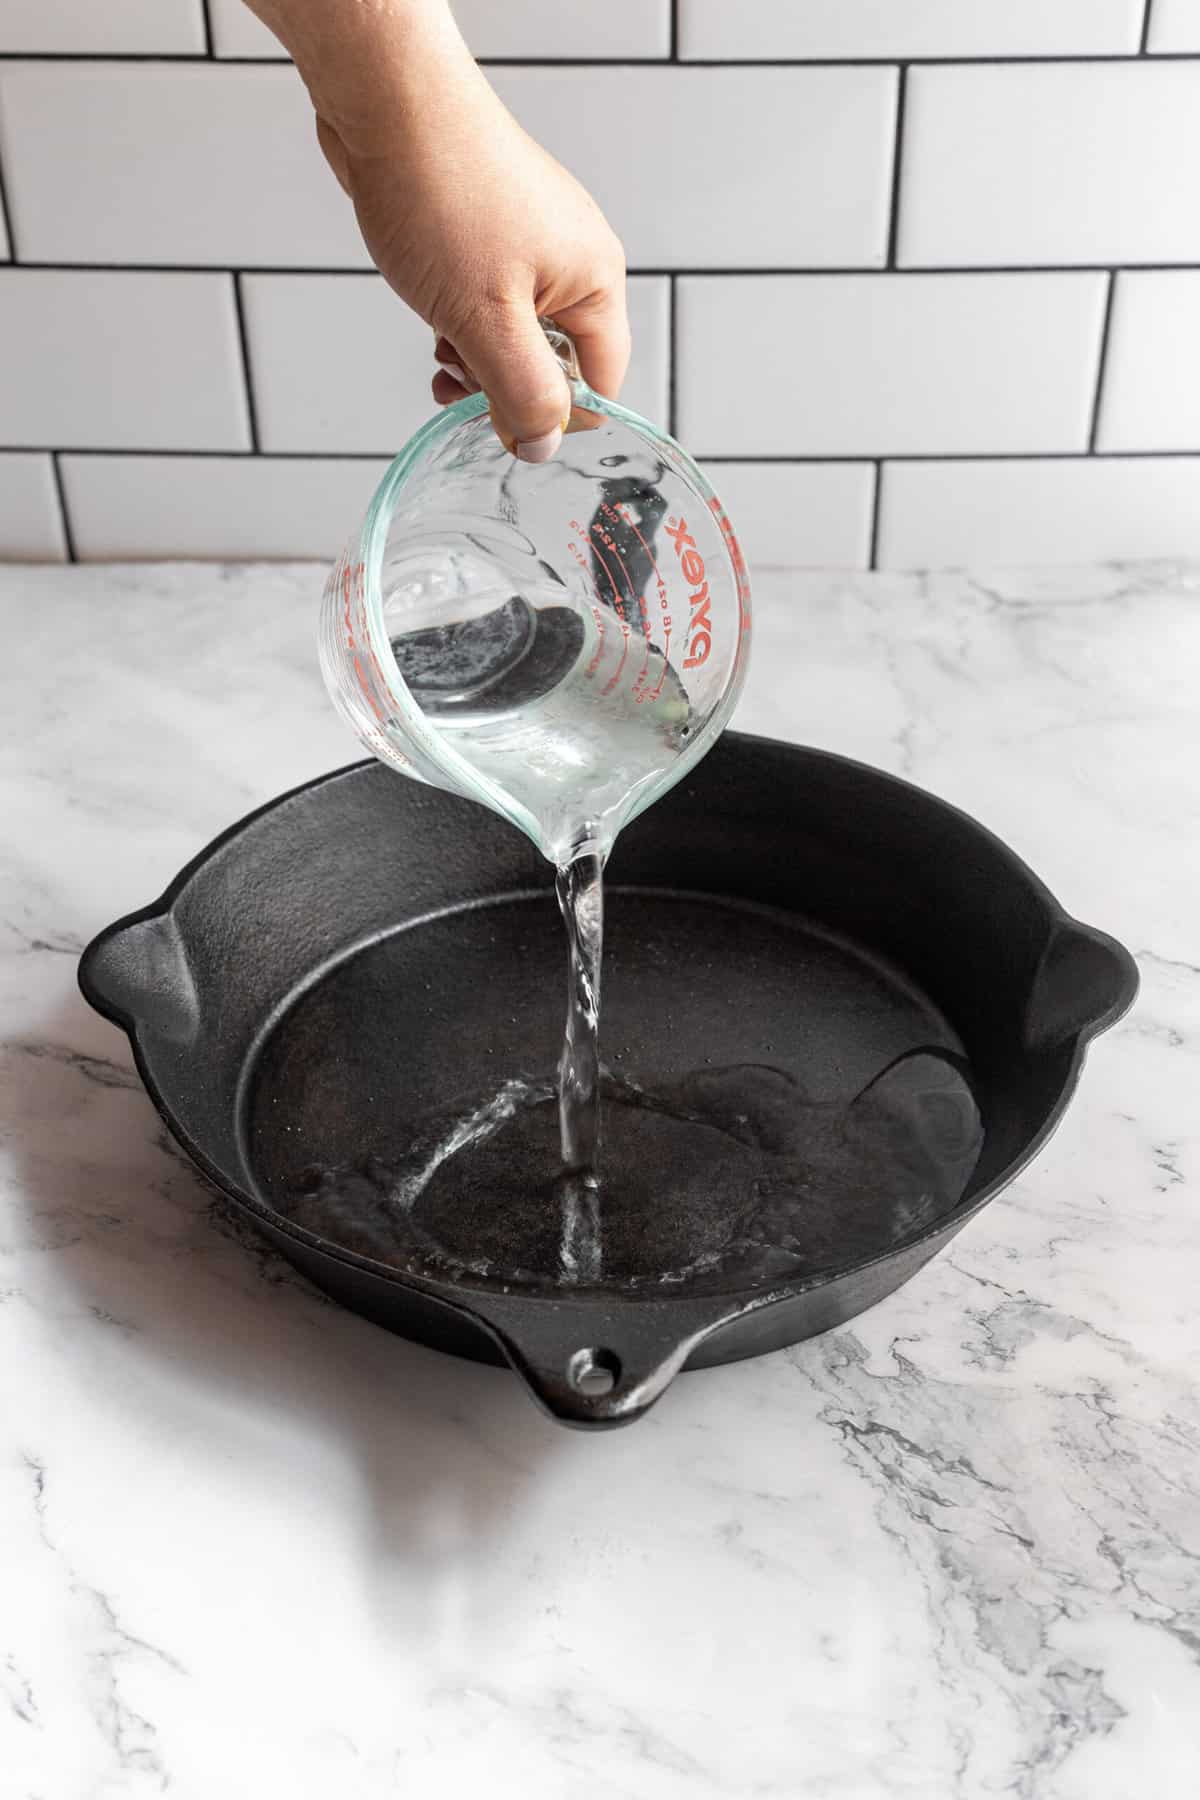 Clean cast iron pans with hot water—and maybe a little soap